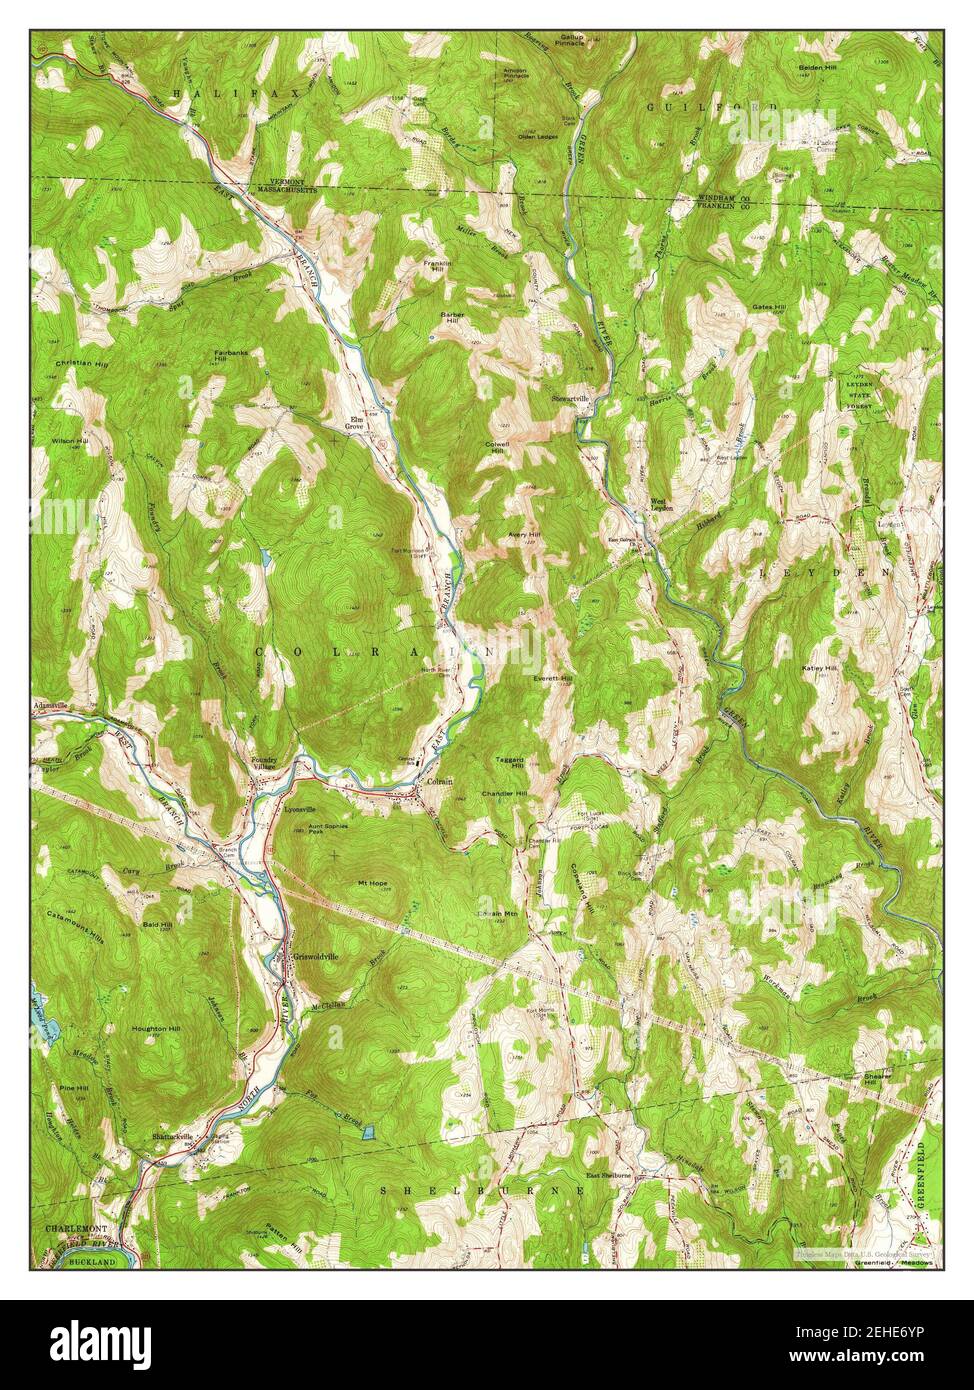 Colrain, Massachusetts, map 1961, 1:24000, United States of America by Timeless Maps, data U.S. Geological Survey Stock Photo